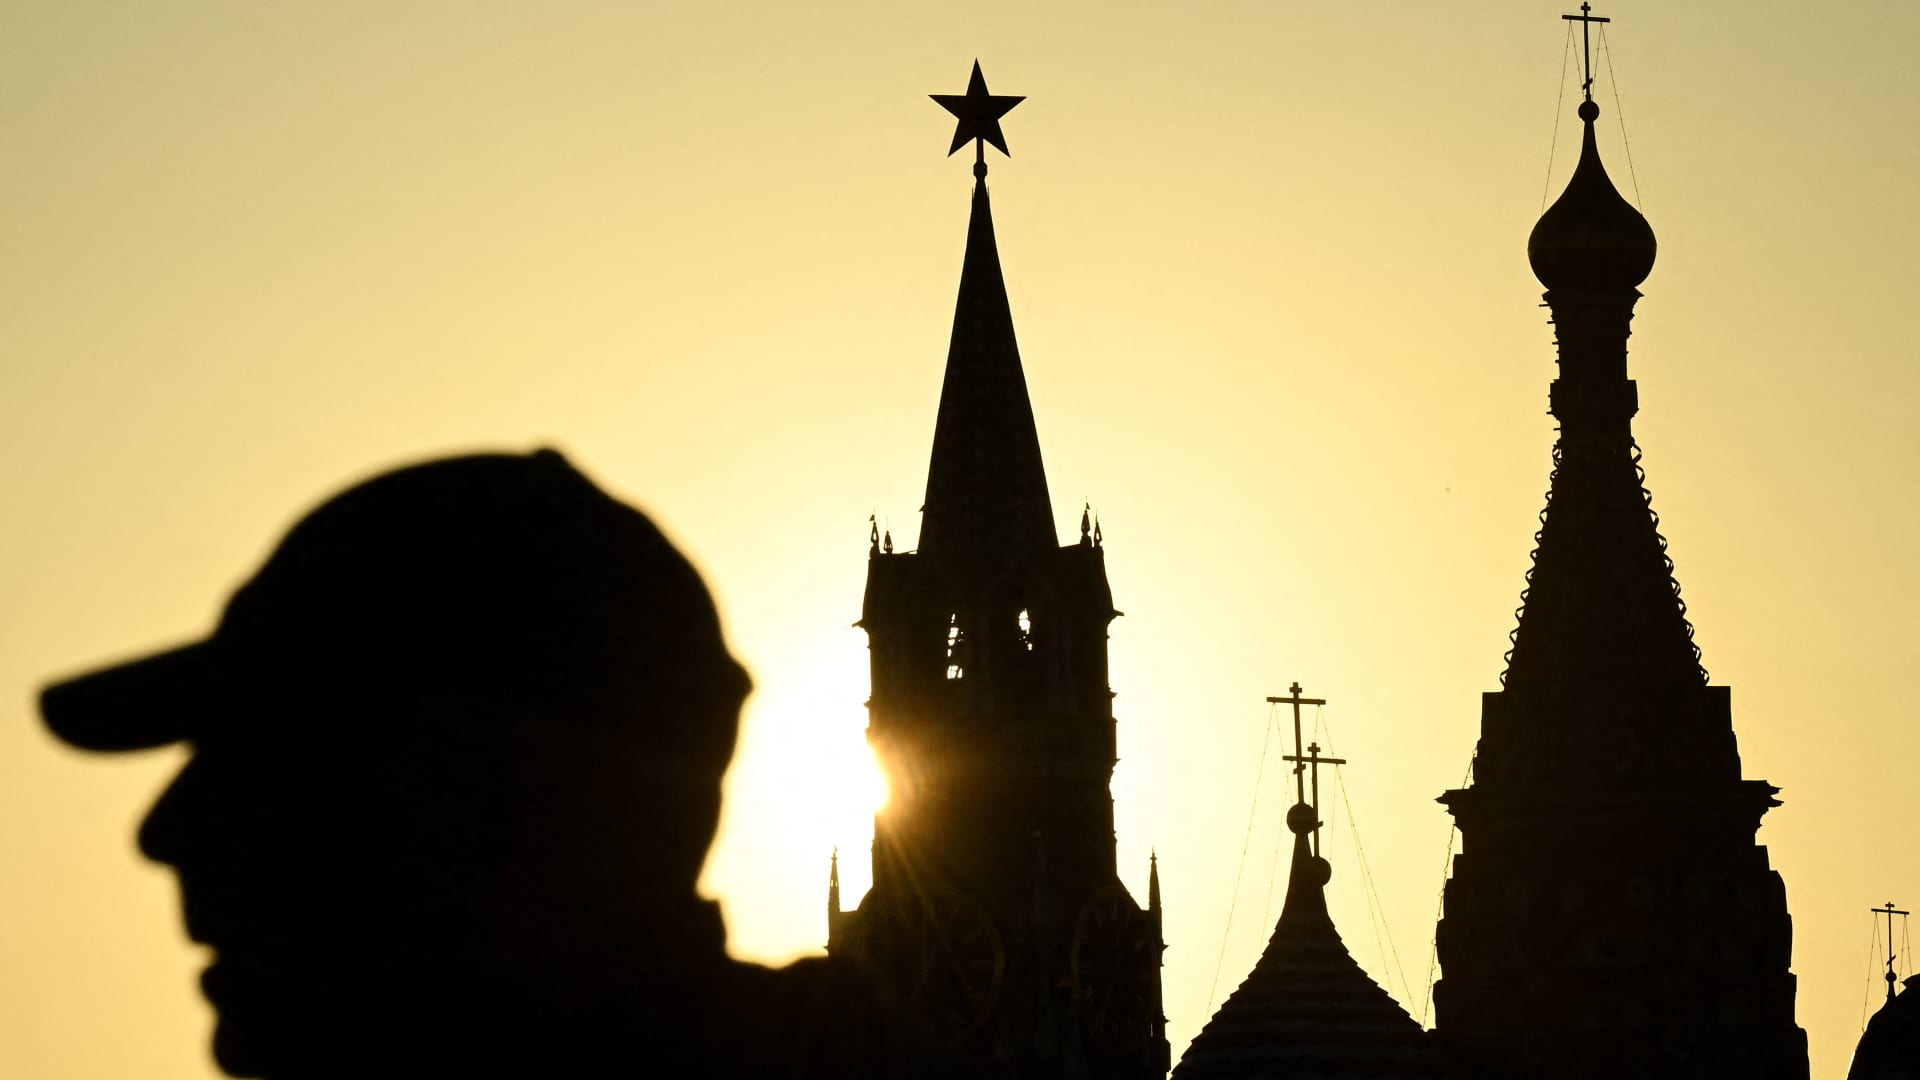 A man walks in Zaryadye park in front of the Kremlin's Spasskaya tower and St Basil's cathedral during the sunset in downtown Moscow on April 19, 2022. (Photo by Kirill KUDRYAVTSEV / AFP) (Photo by KIRILL KUDRYAVTSEV/AFP via Getty Images)